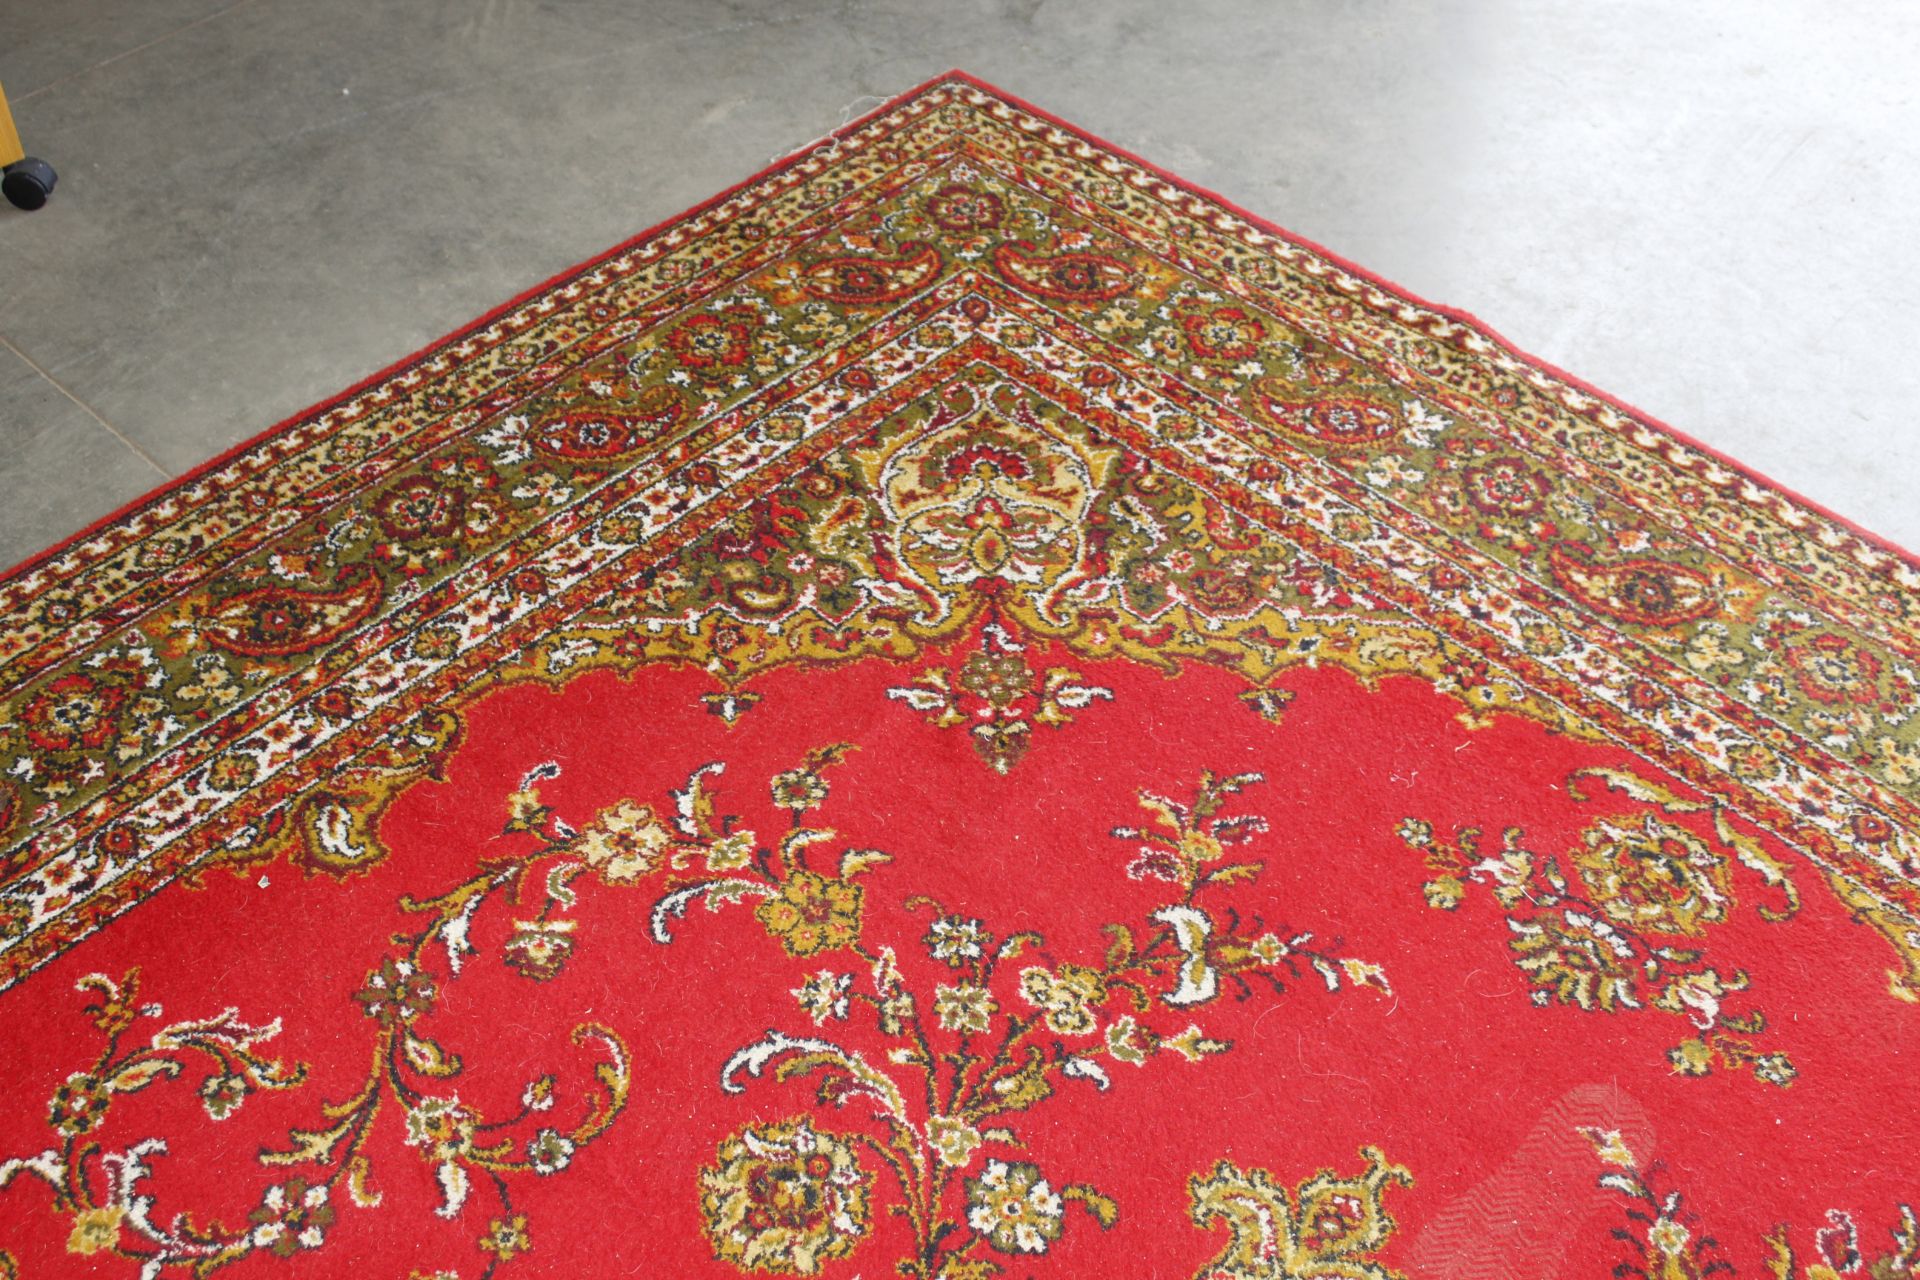 An approx. 12' x 9' red patterned rug AF - Image 7 of 11